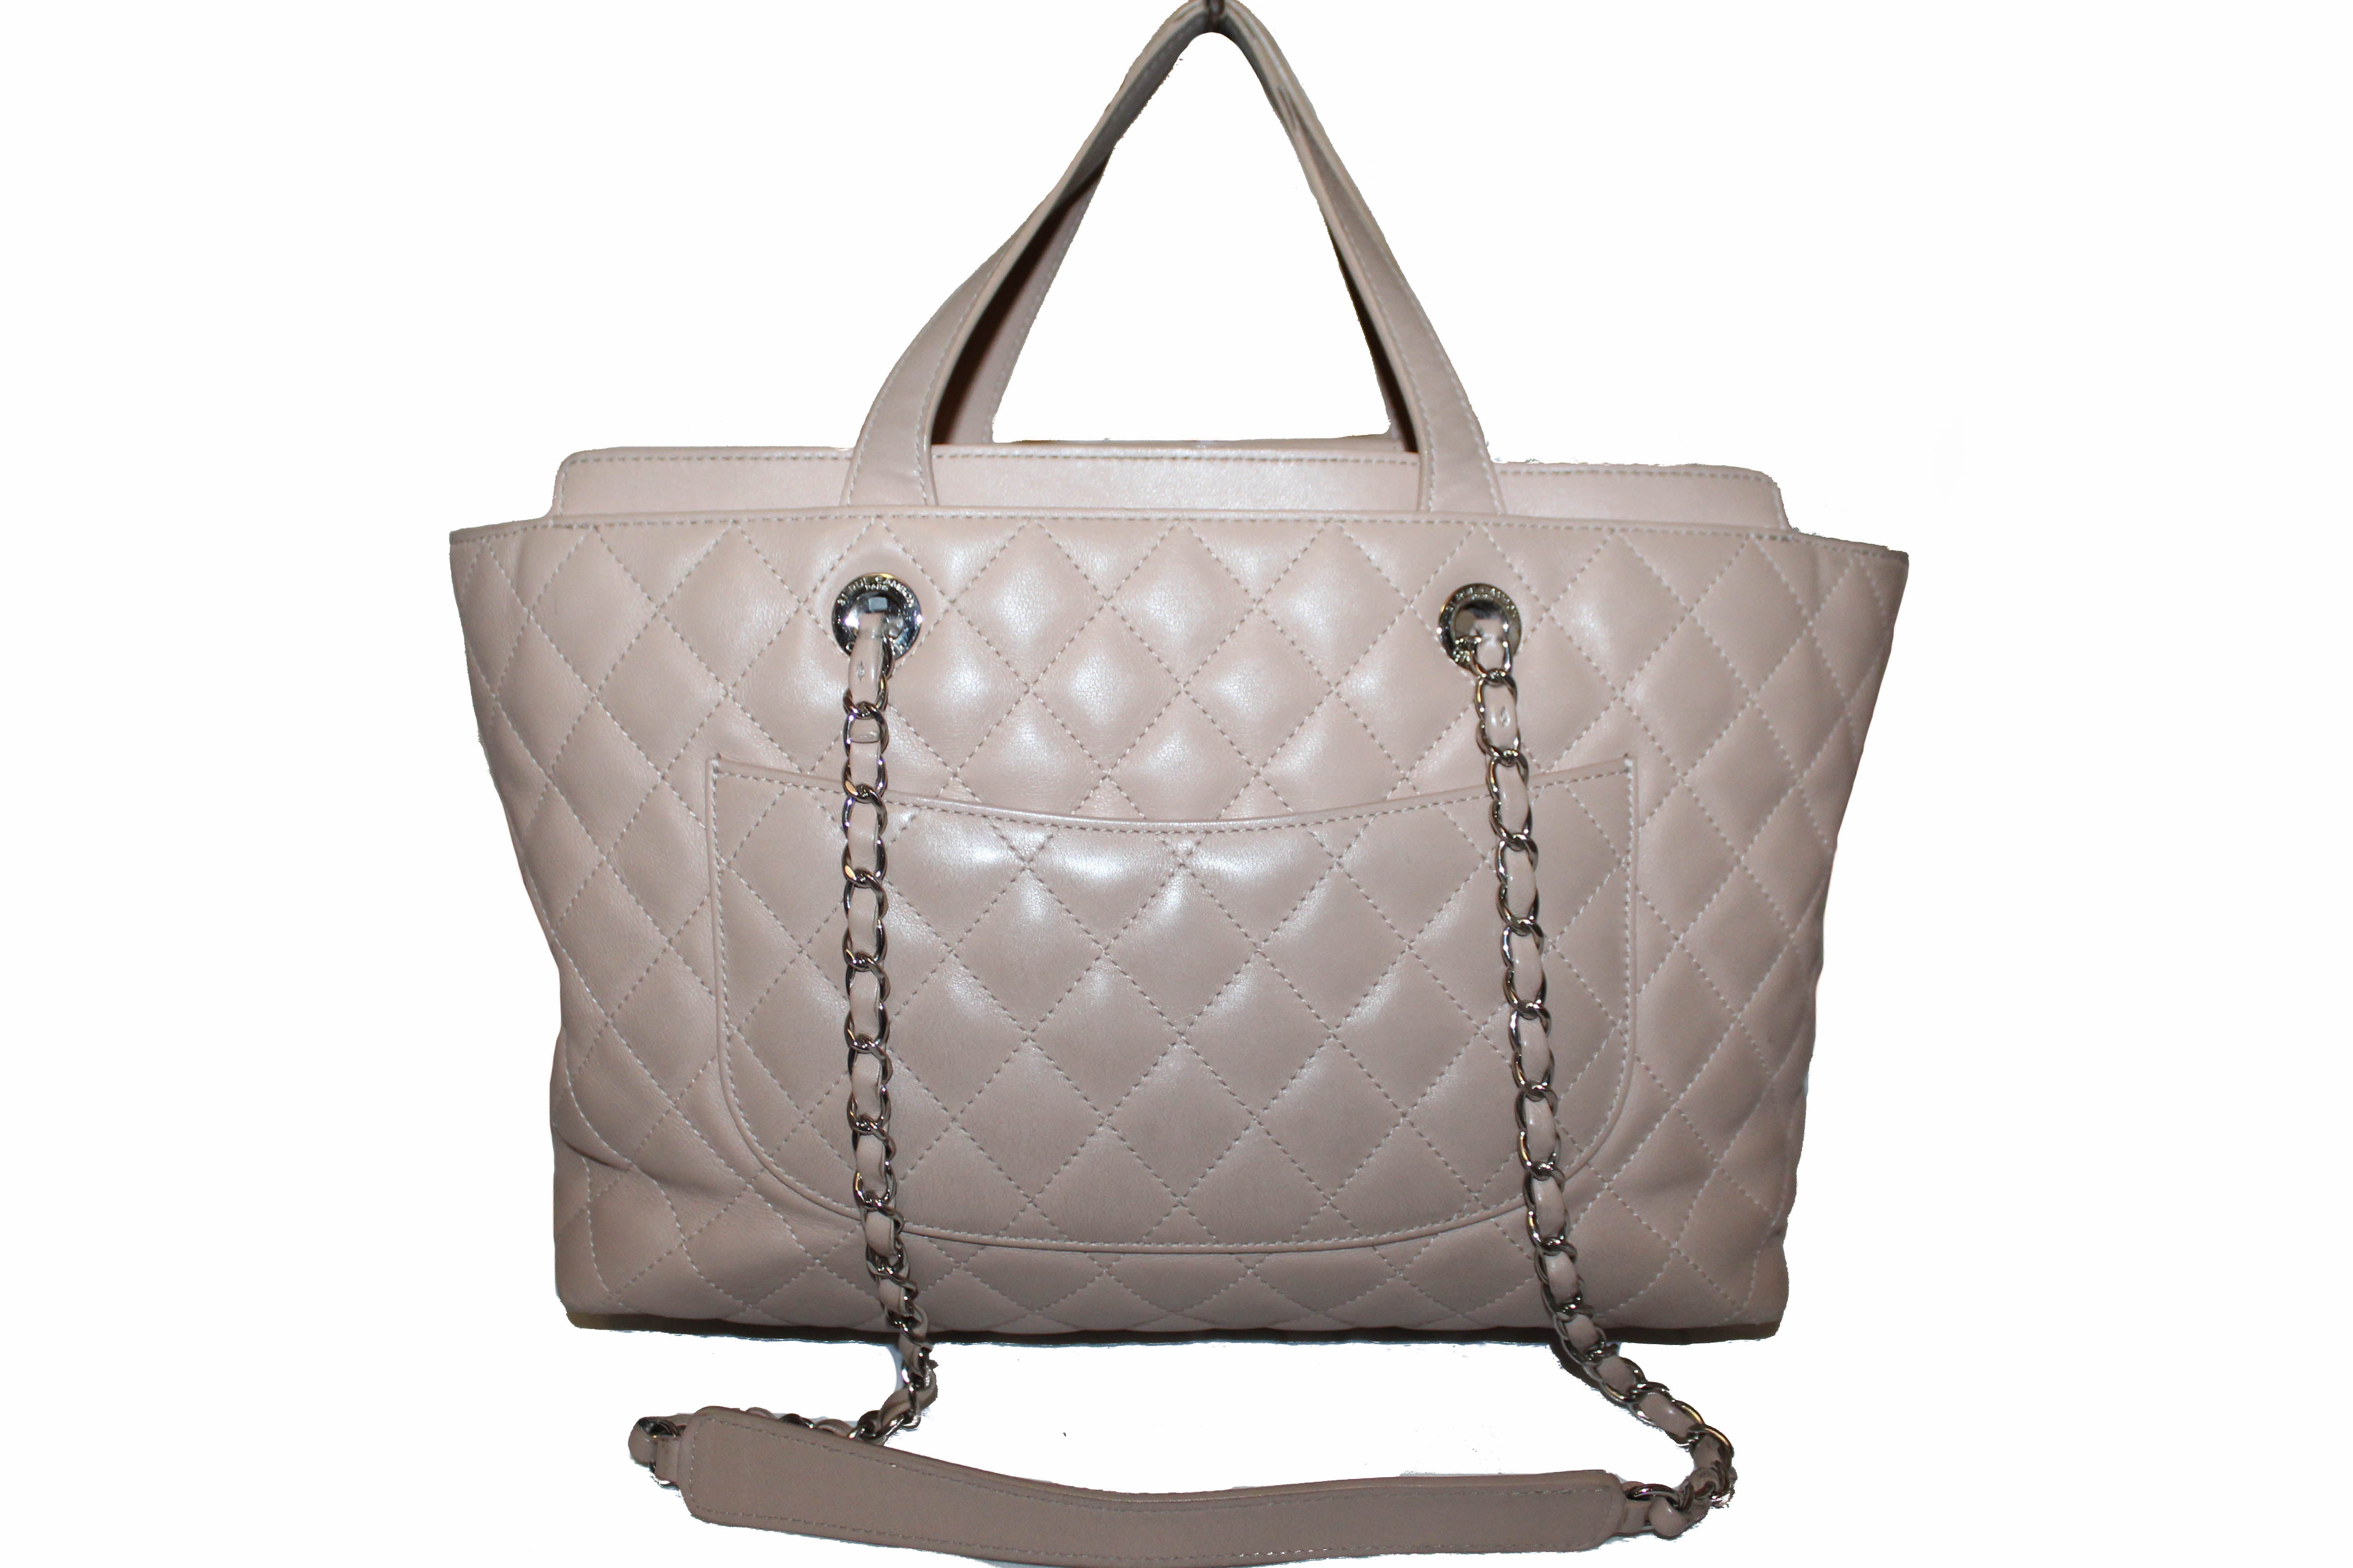 Chanel White Leather Essential Rue Cambon Shopping Tote Small Q6BDII3PWH000